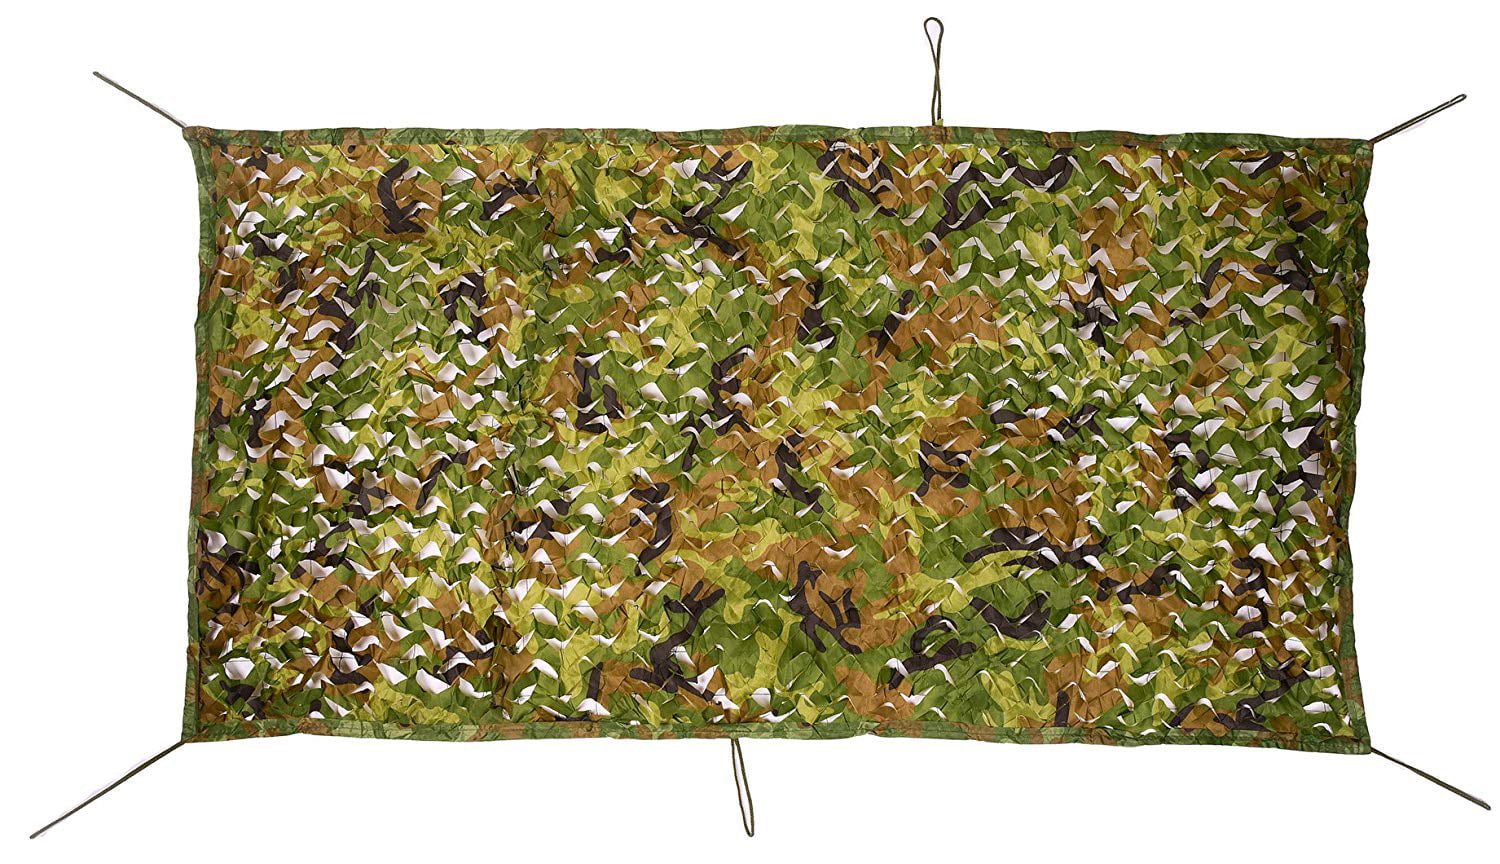 Details about   Camo Netting Military Net Woodland Desert Net Sunshade Camping Shooting Hunting 